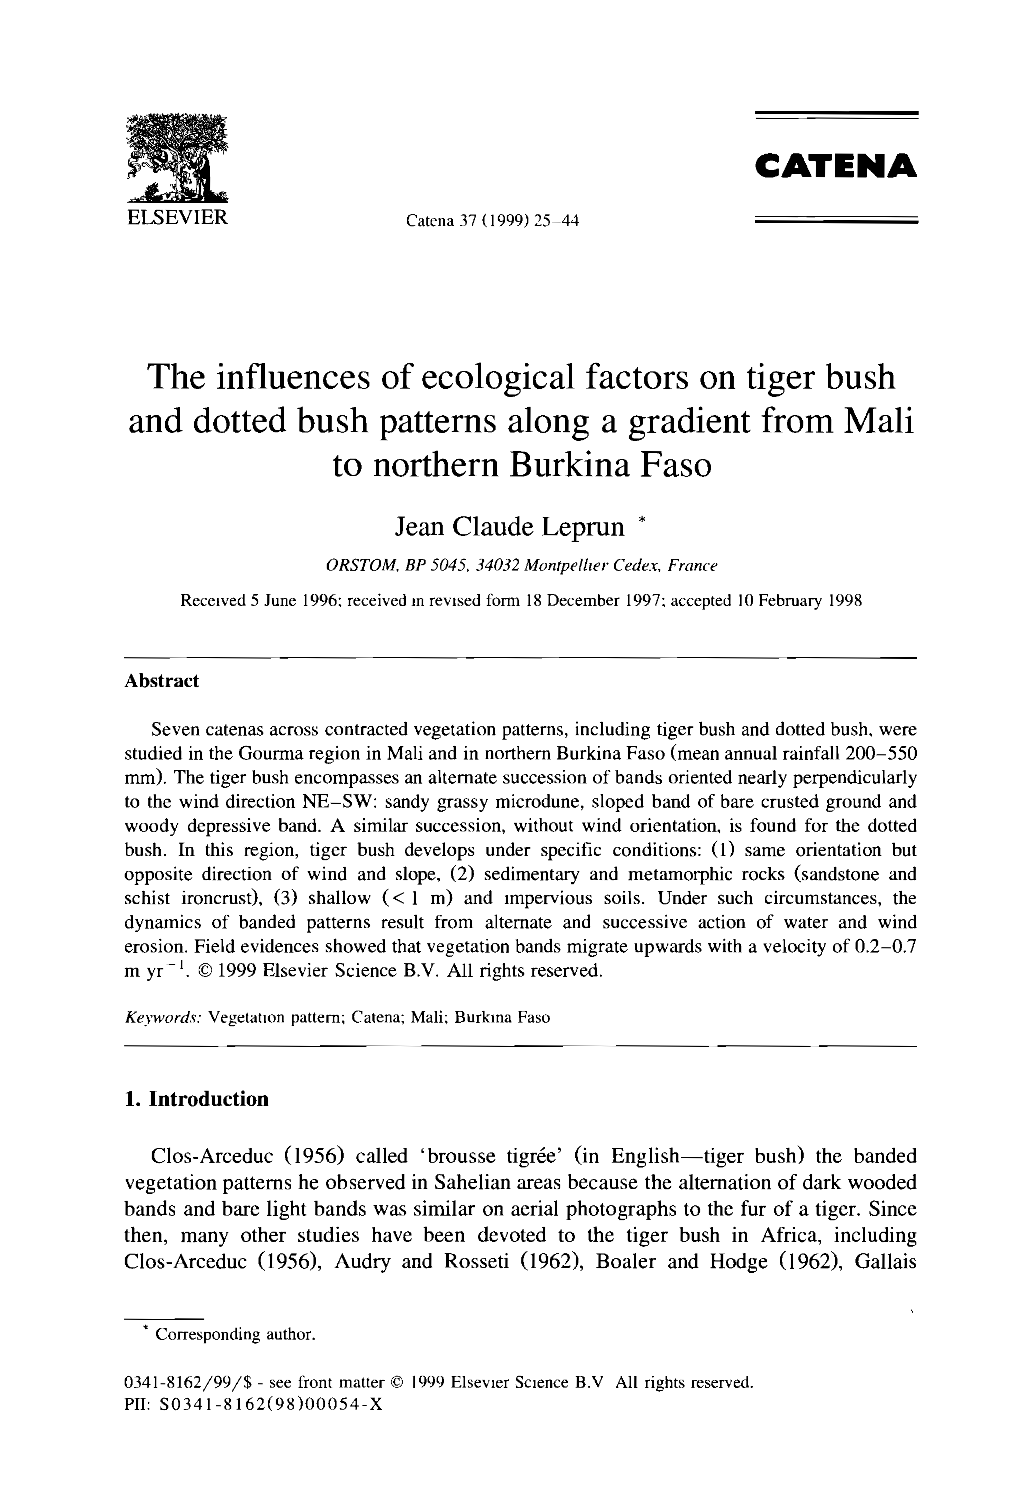 The Influences of Ecological Factors on Tiger Bush and Dotted Bush Patterns Along a Gradient from Mali to Northern Burkina Faso